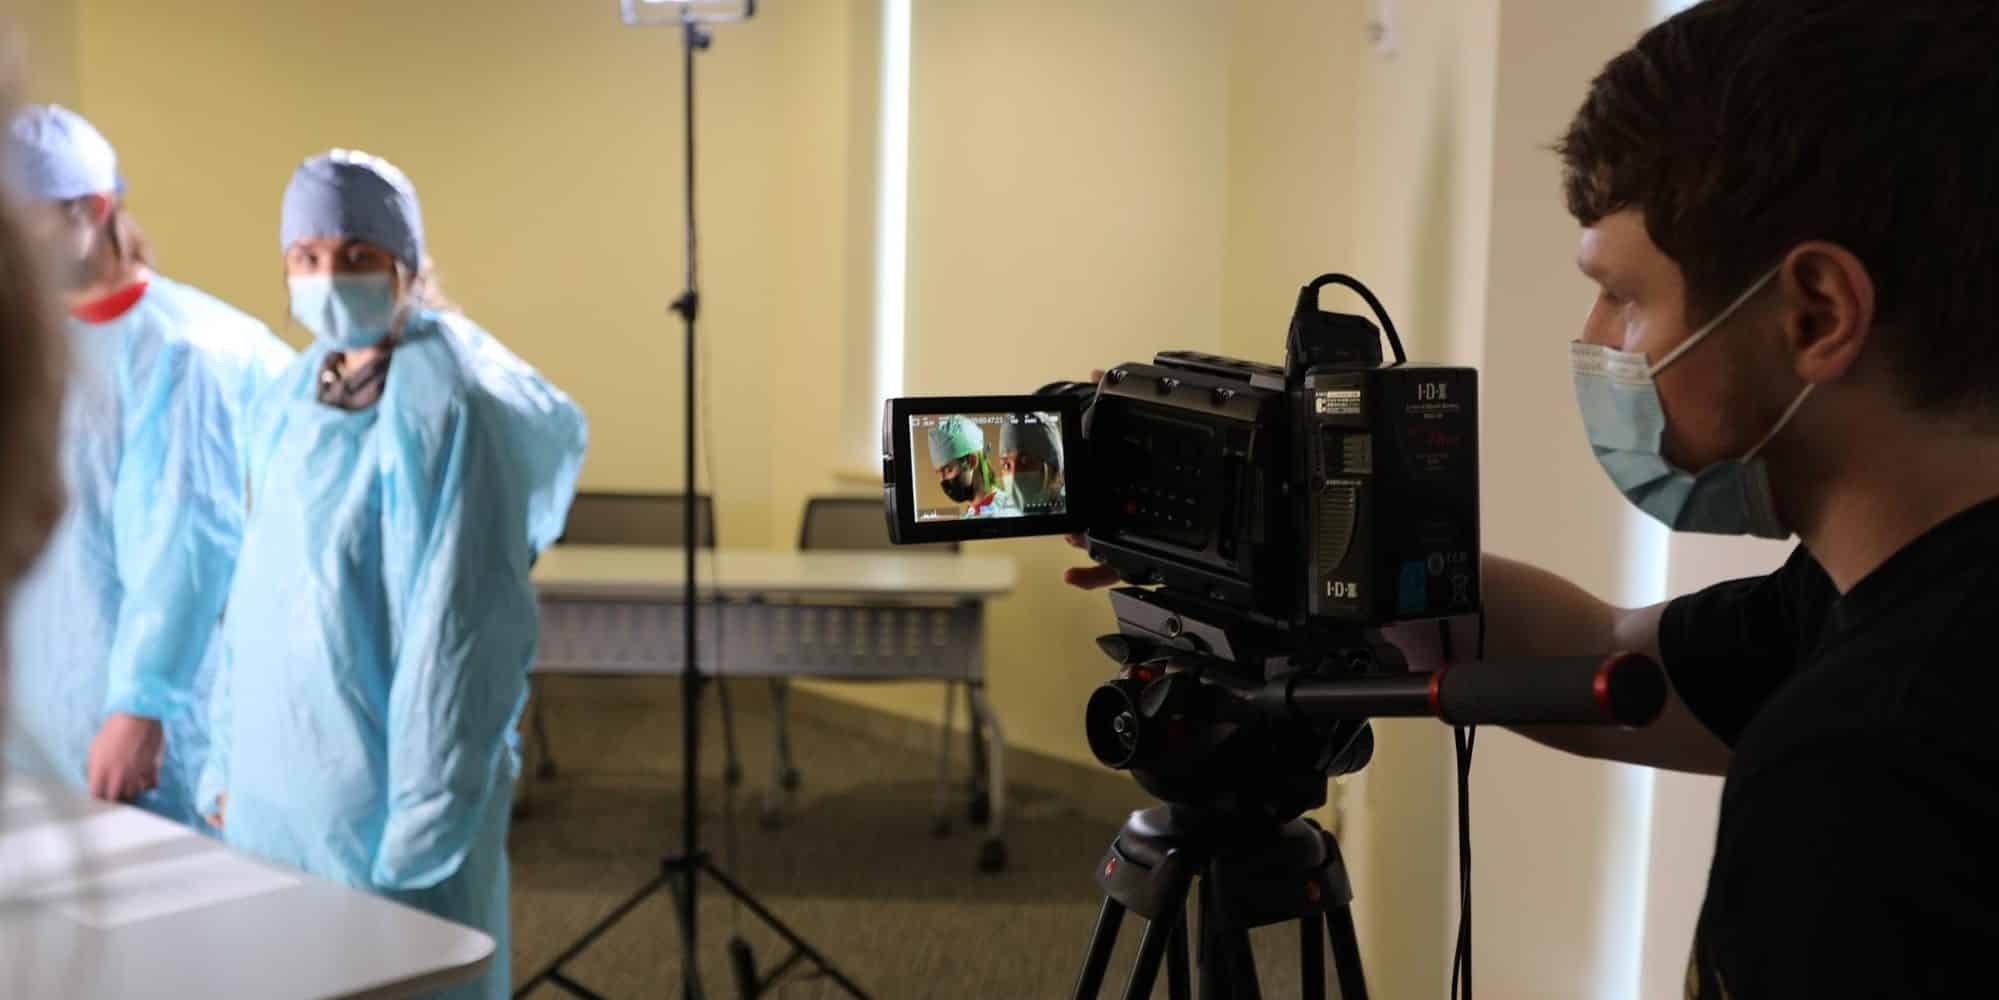 Student videographer films students wearing scrubs